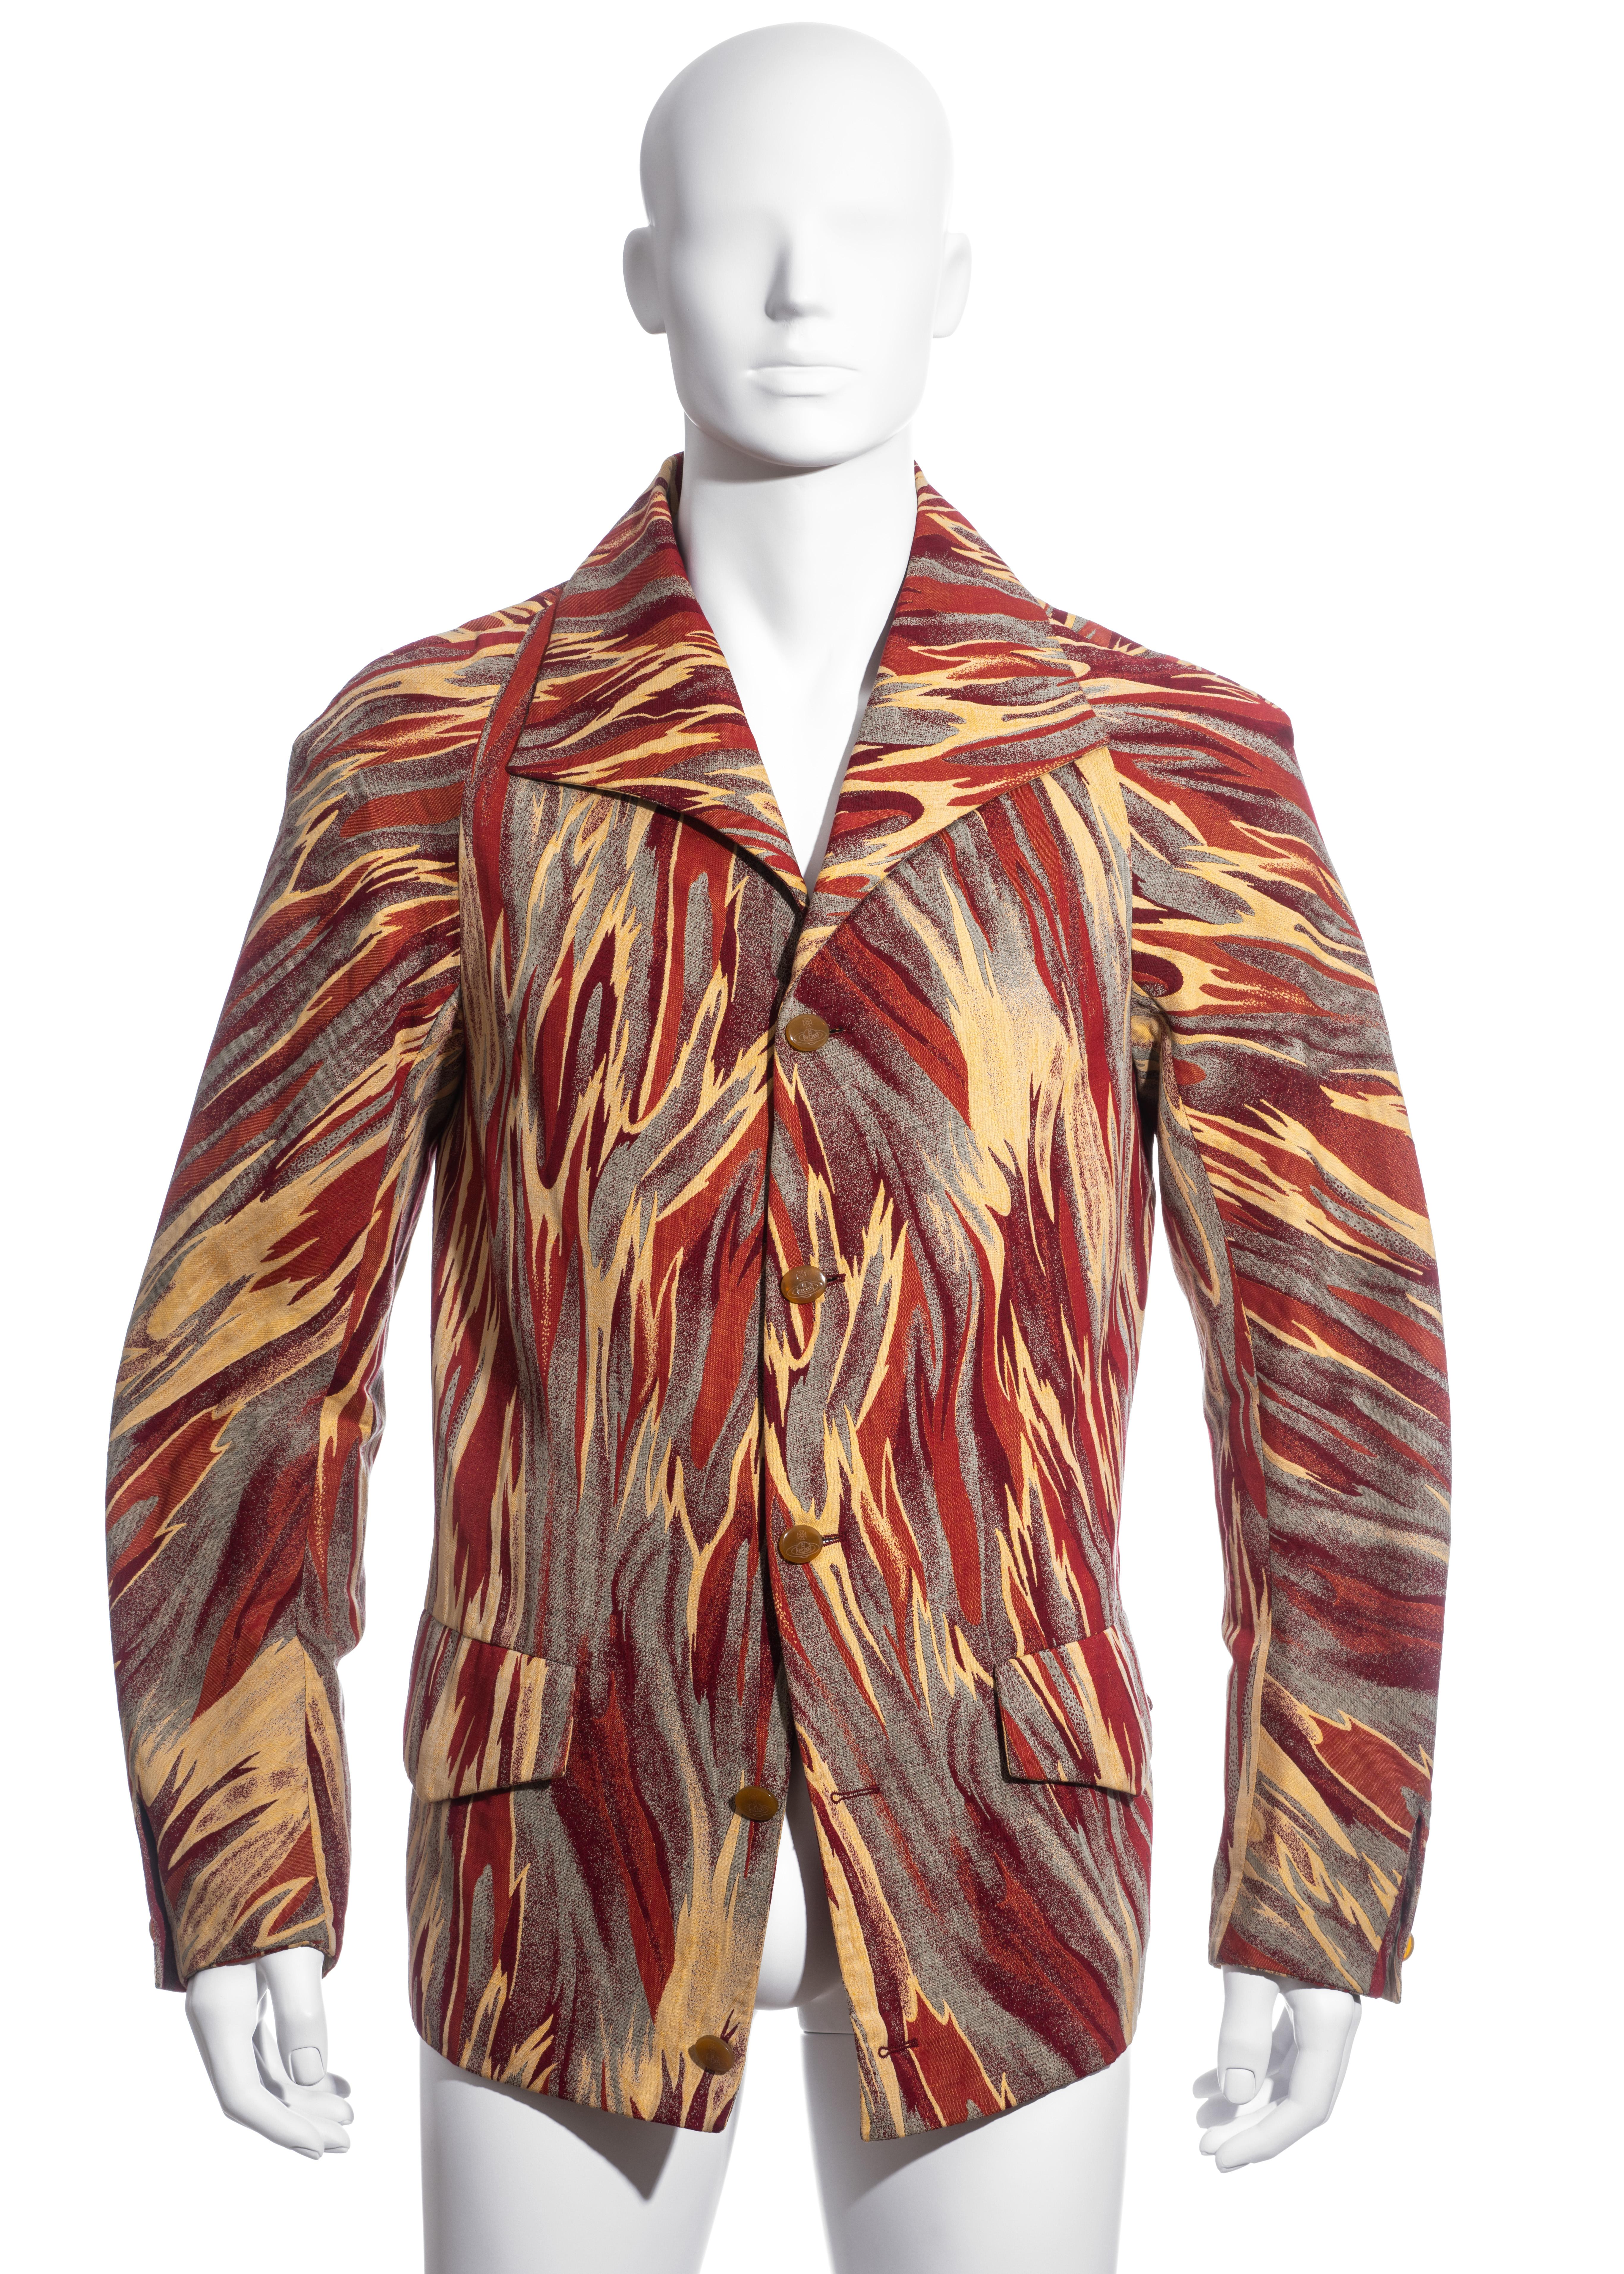 ▪ Men's Vivienne Westwood button-up jacket
▪ Cotton jacquard in a fire patterned design
▪ Curved Raglan sleeves 
▪ Cotton lining 
▪ Size 50
▪ Fall-Winter 1997